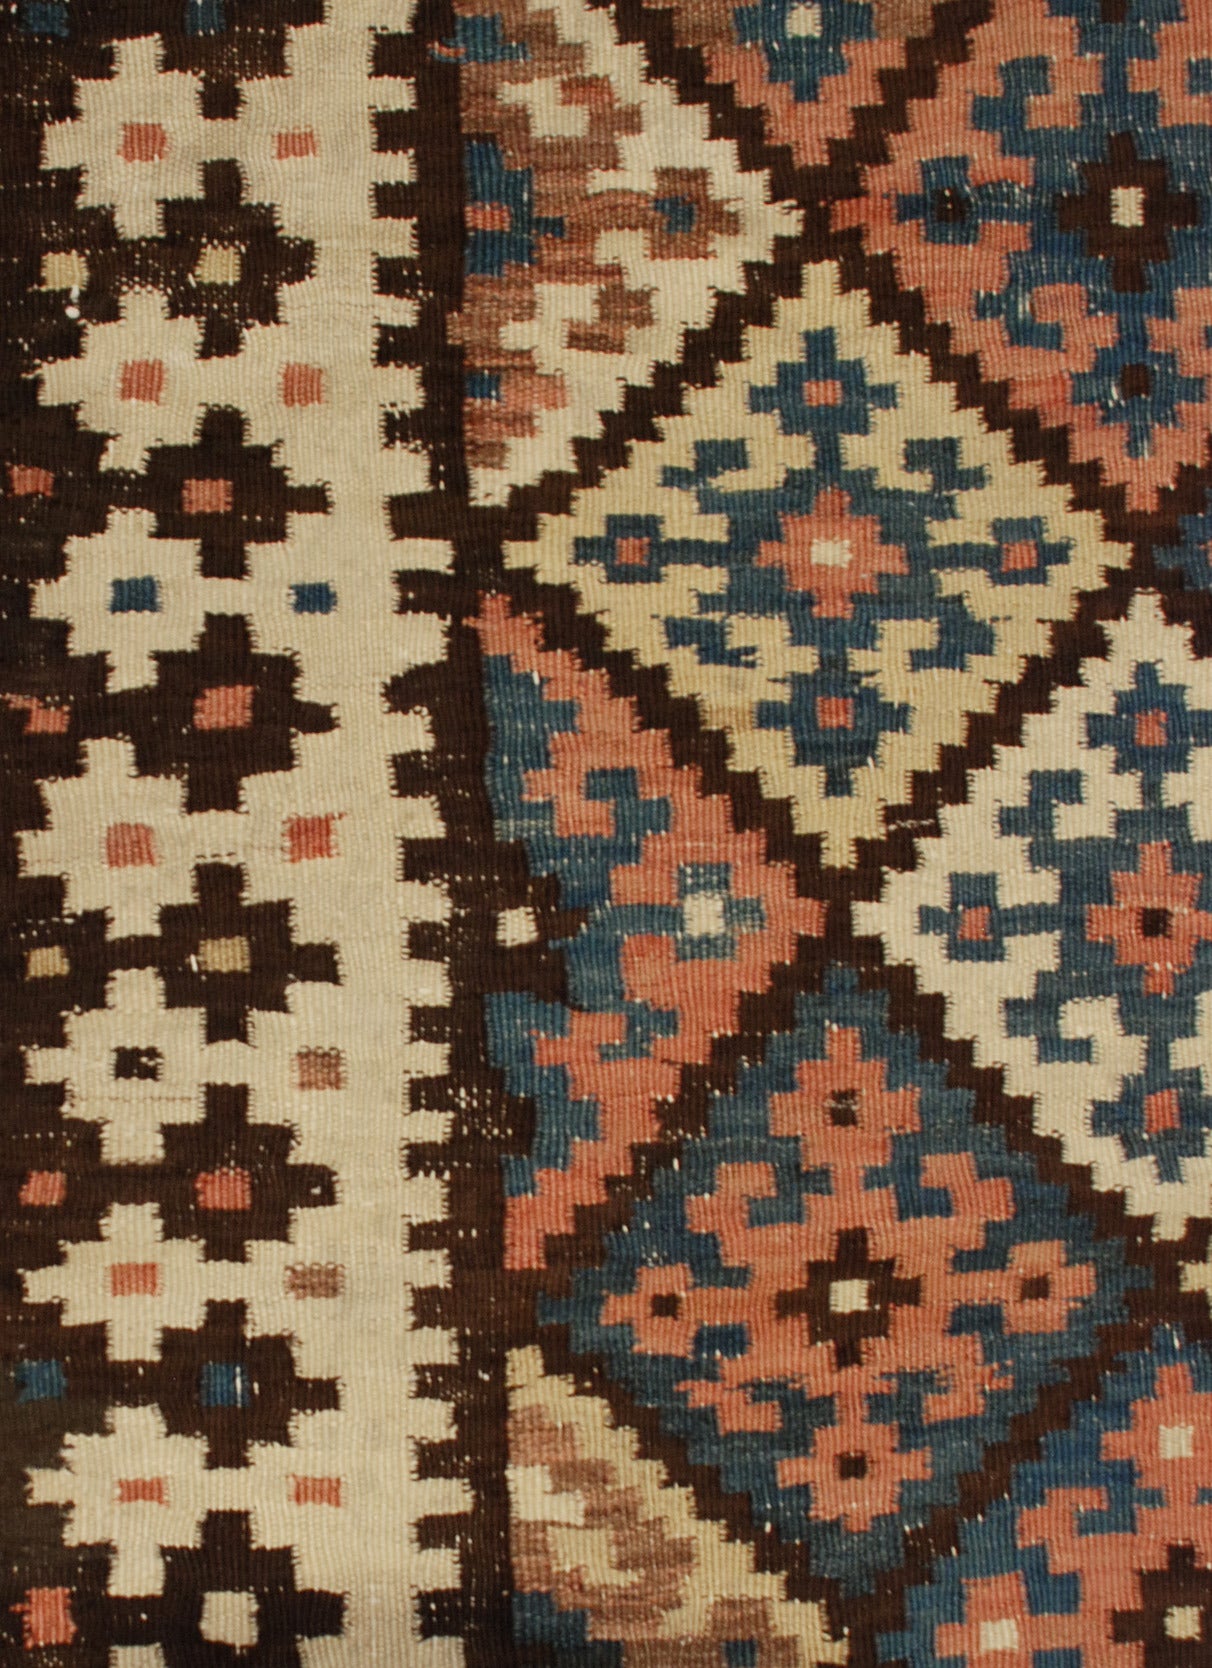 An early 20th century Persian Saveh Kilim runner with an all-over multicolored diamond pattern, surrounded by a complementary geometric border.